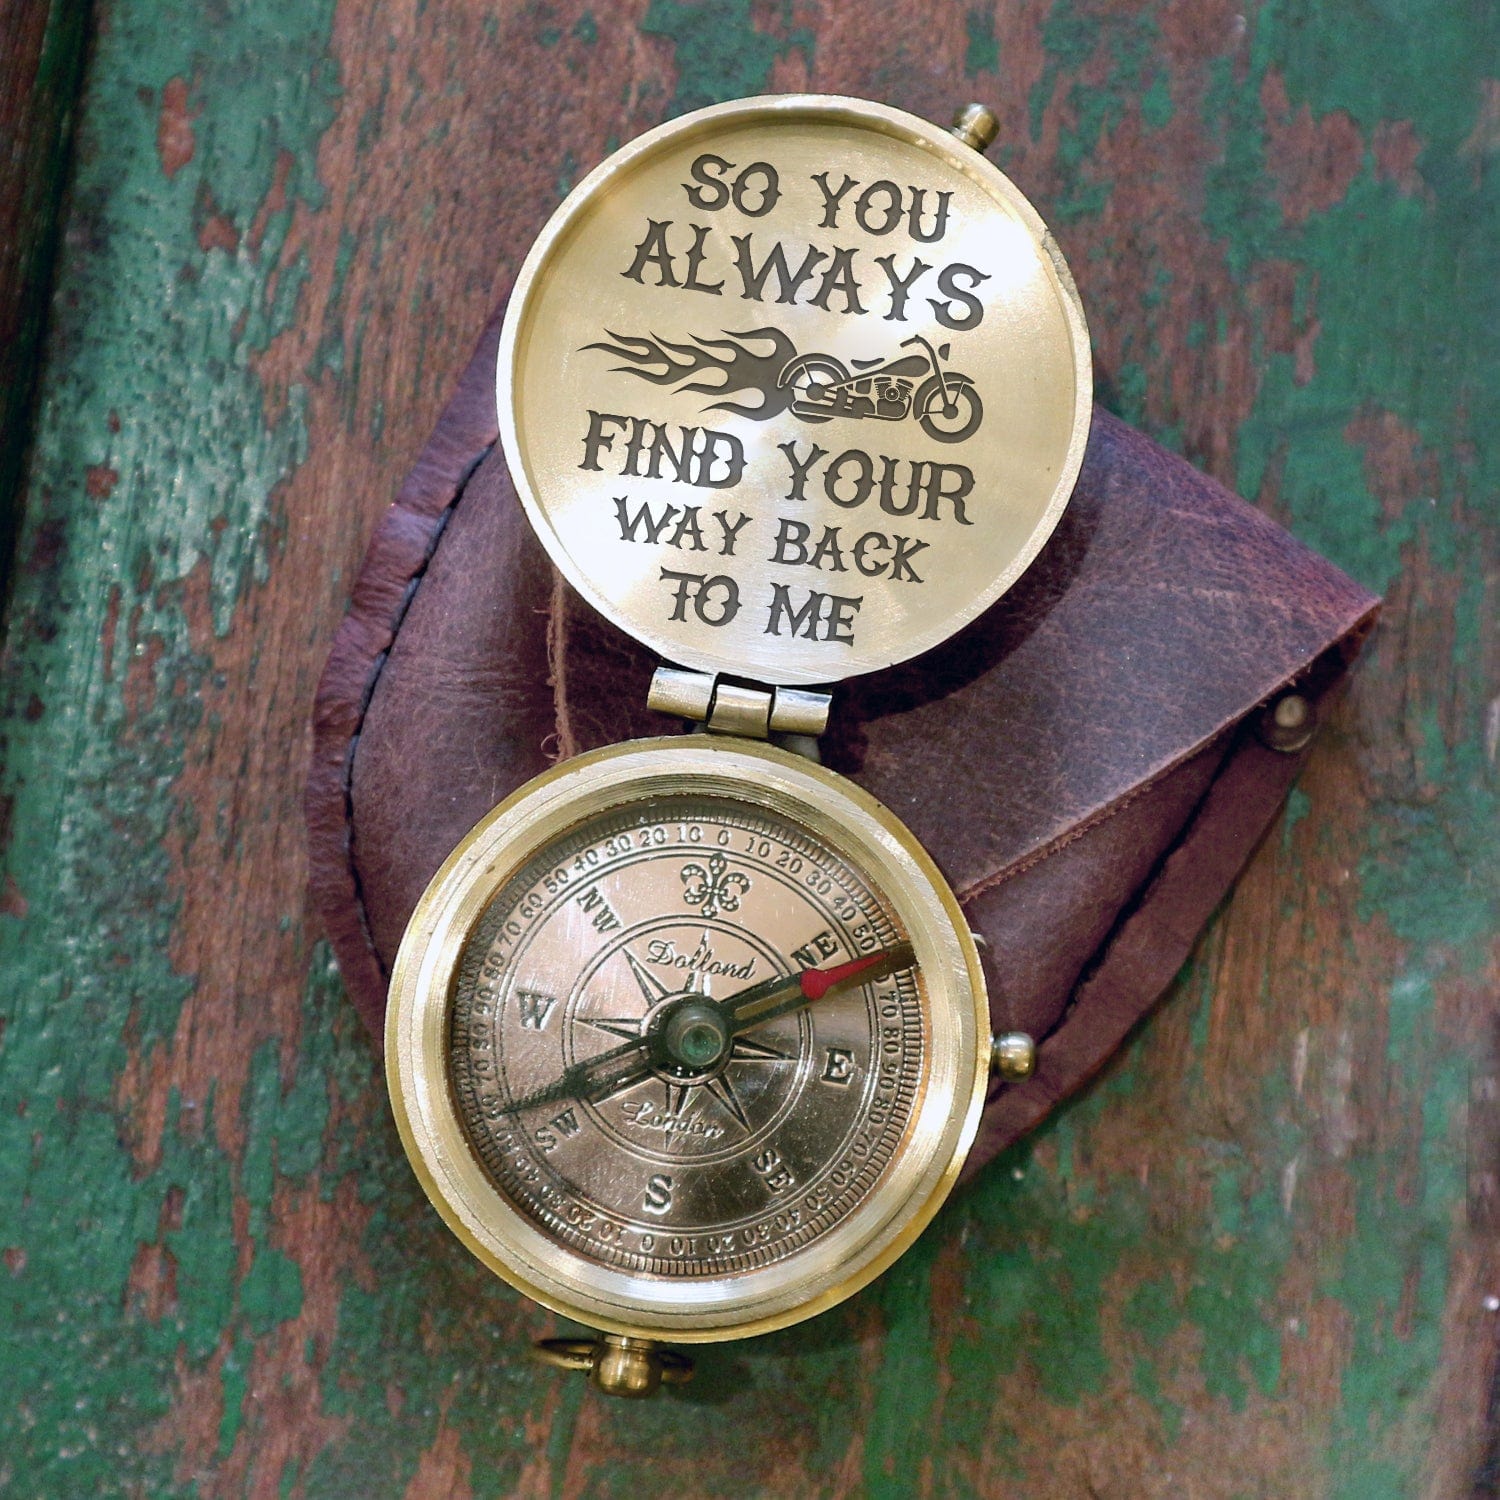 Personalized Engraved Compass - Biker - So You Always Find Your Way Back To Me - Gpb26001